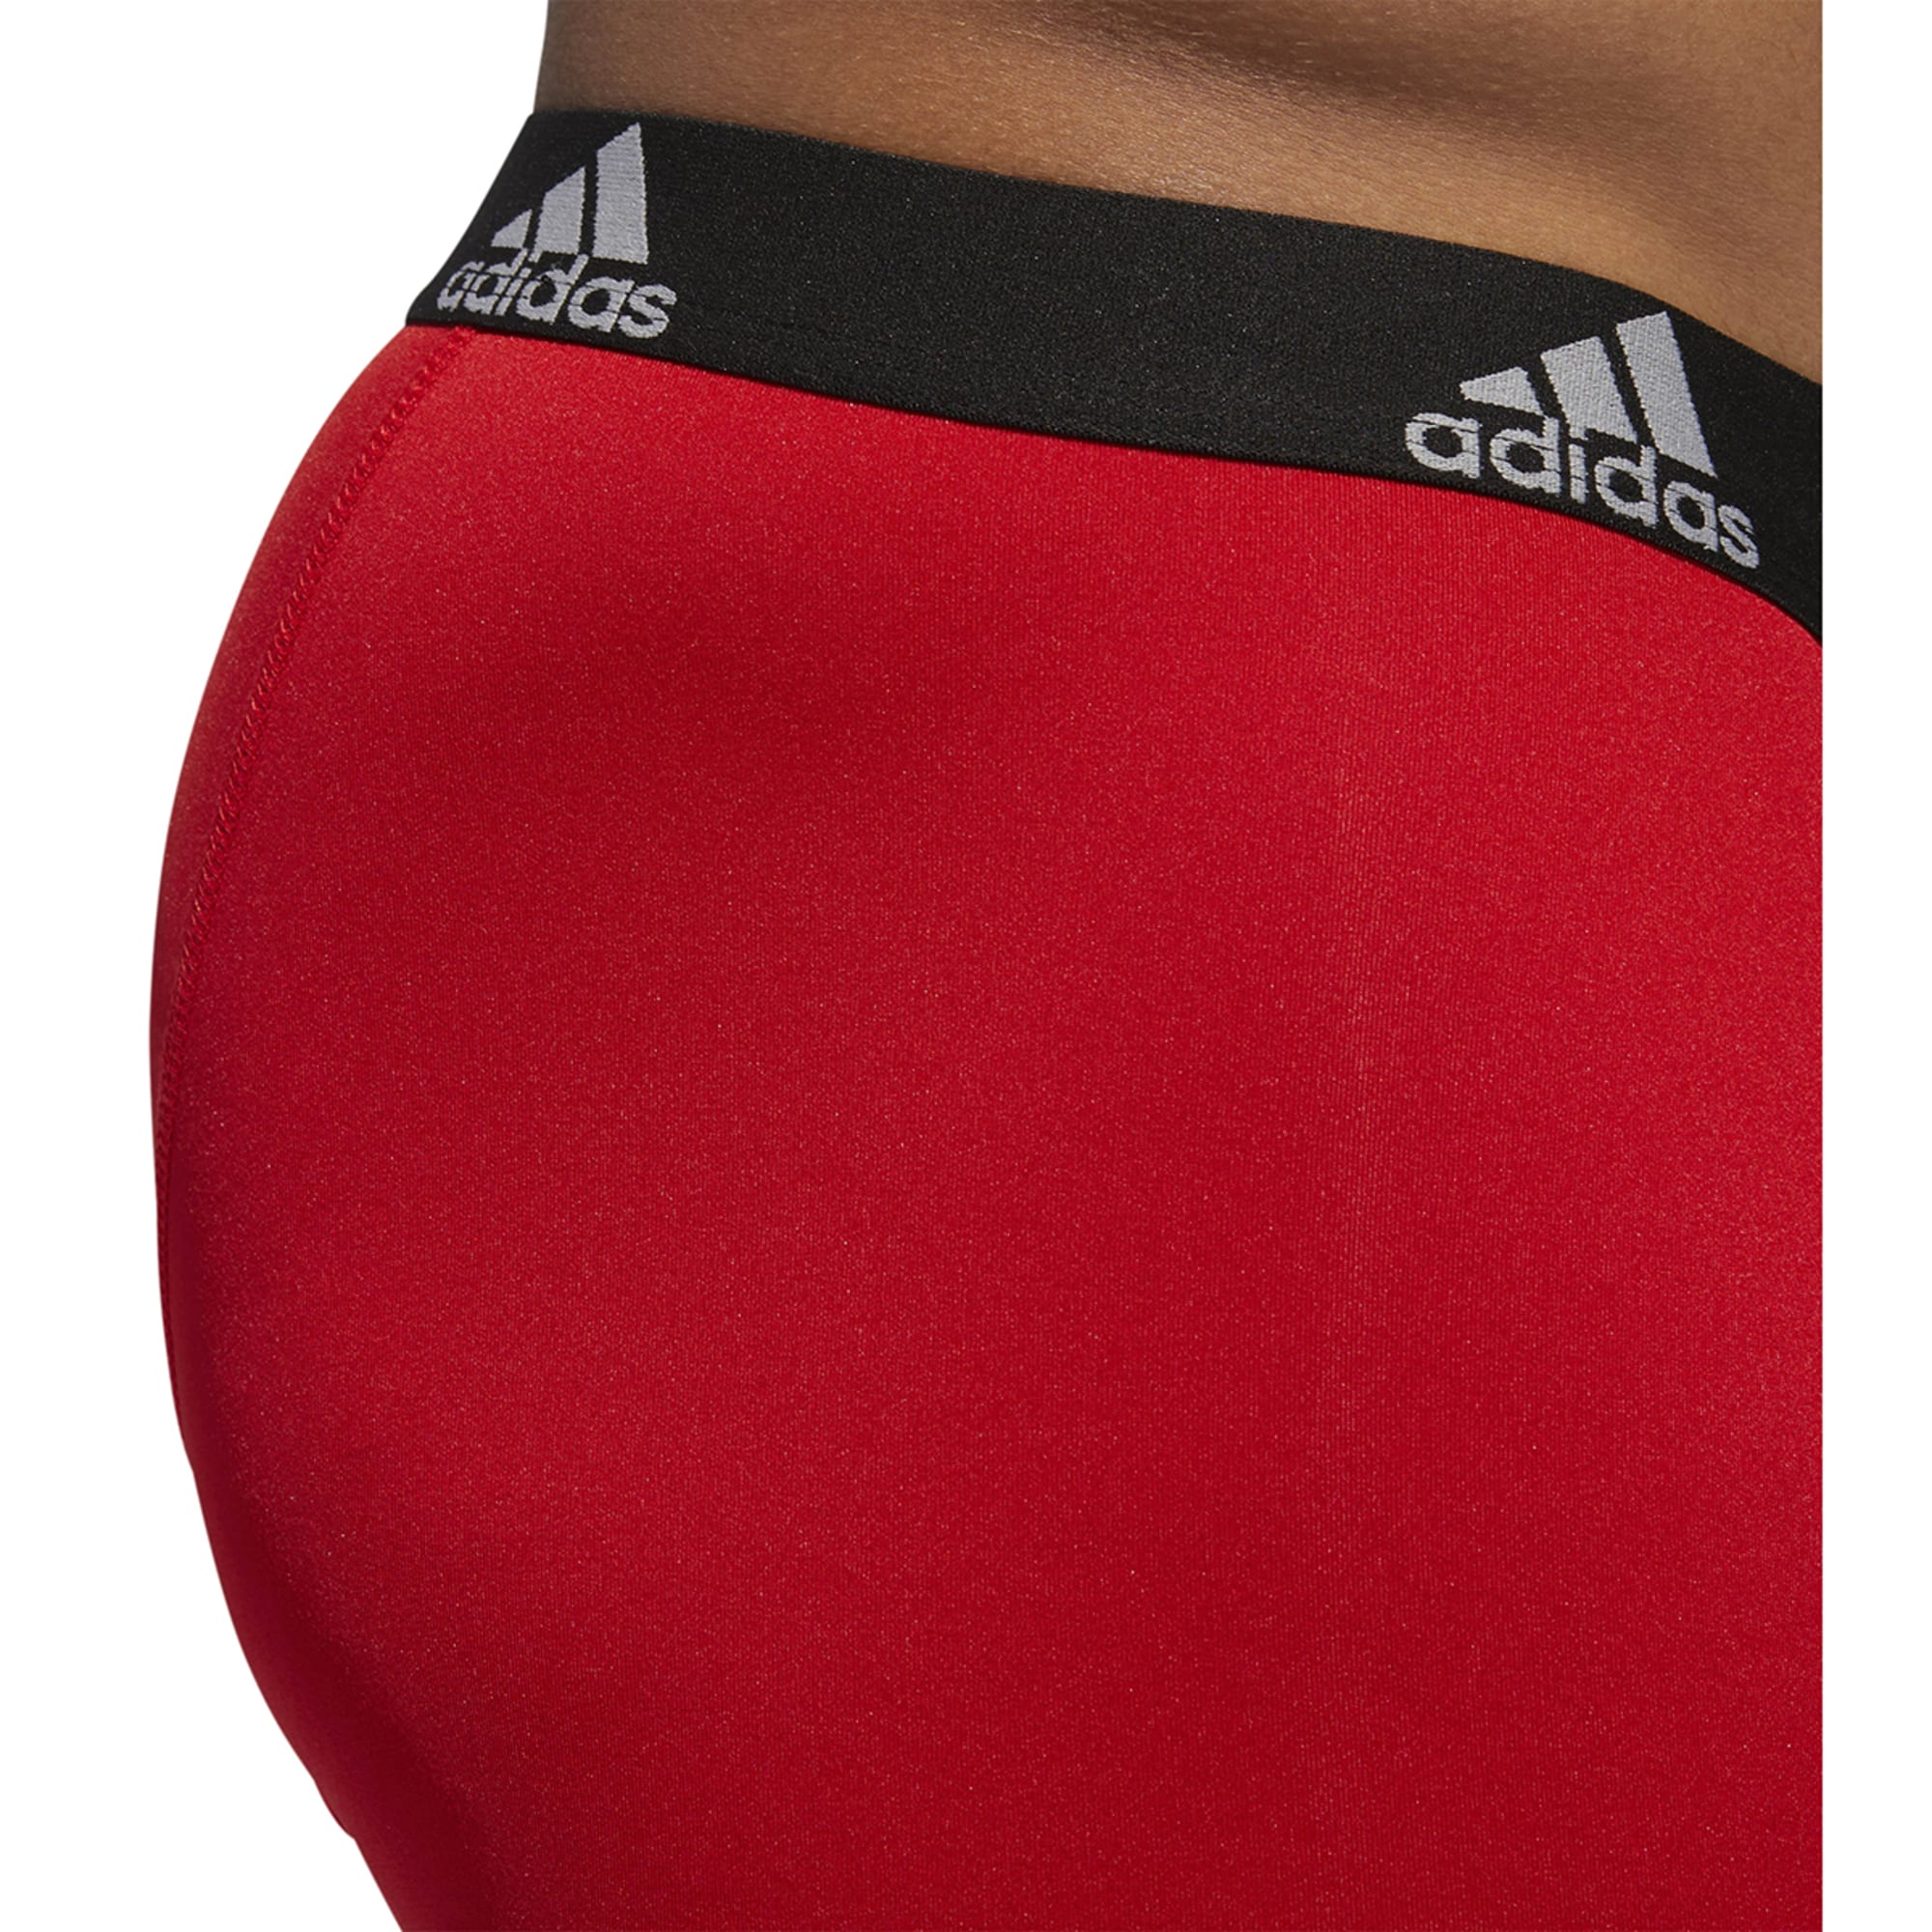 ADIDAS Men's Performance Boxer Briefs, 3 Pack - Eastern Mountain